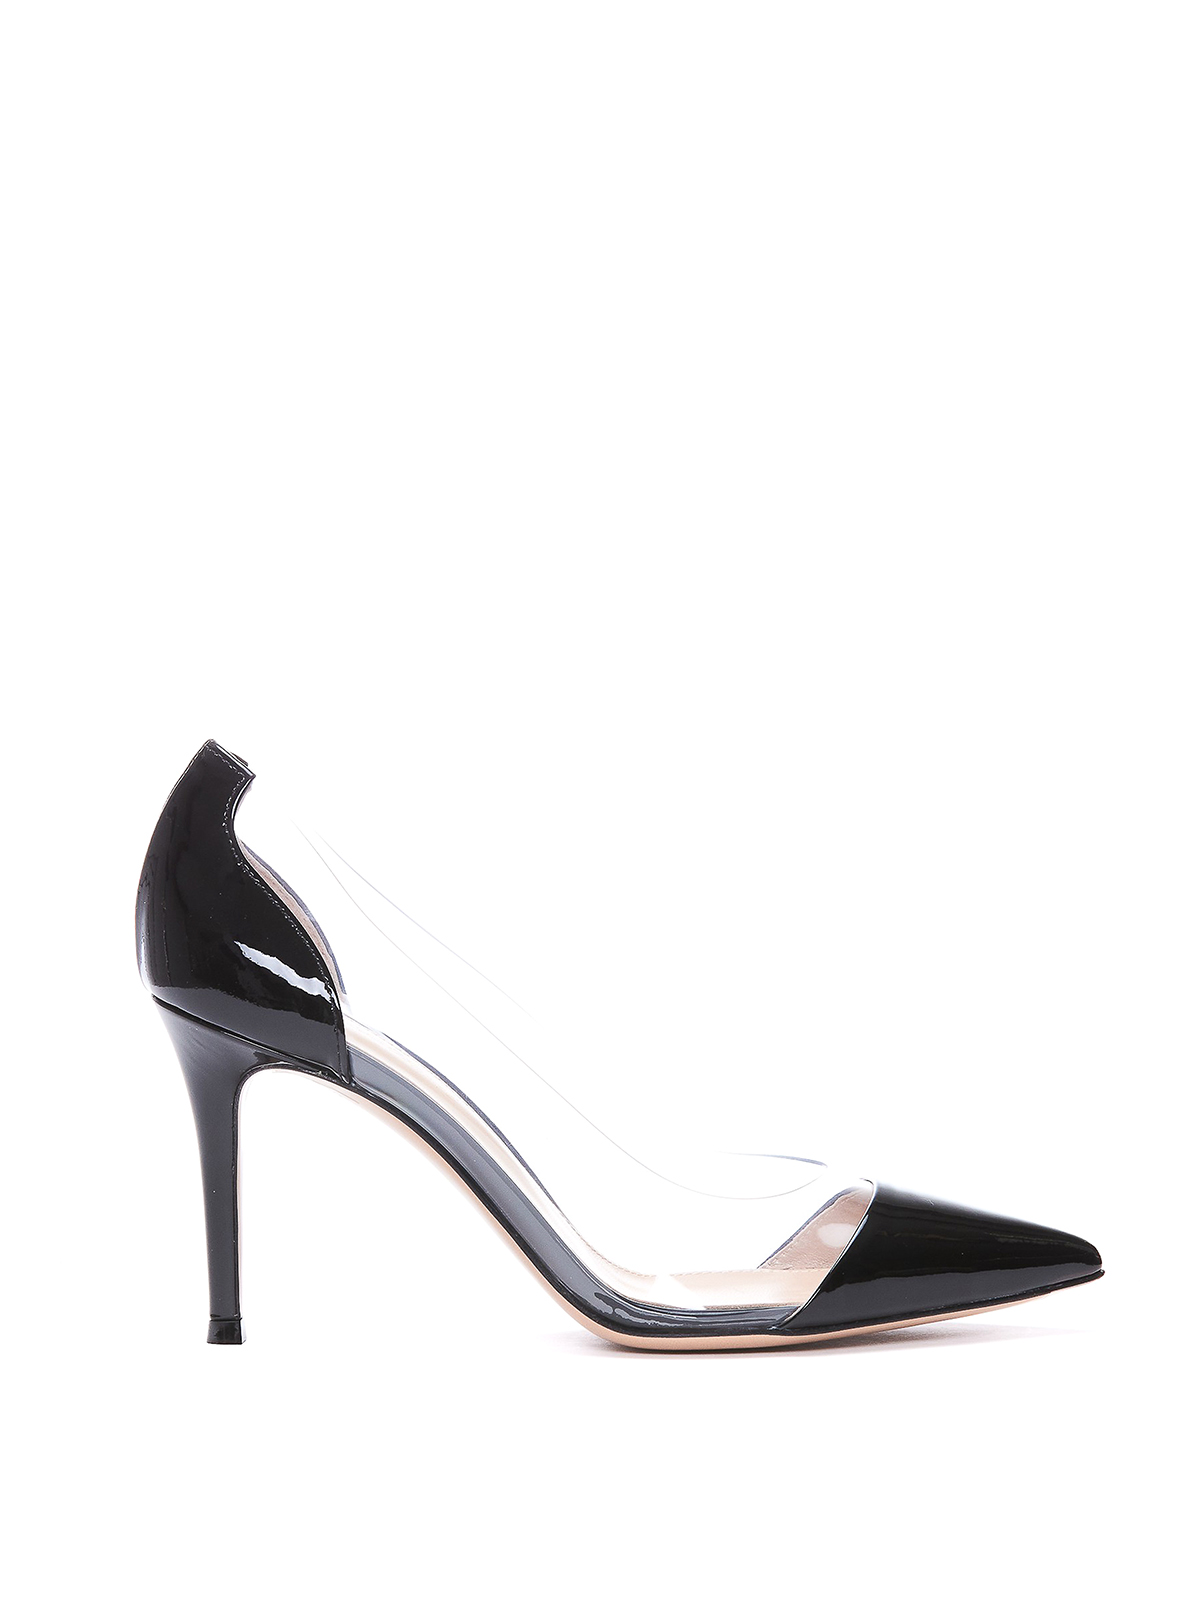 Gianvito Rossi Leather Blend Pumps In Black